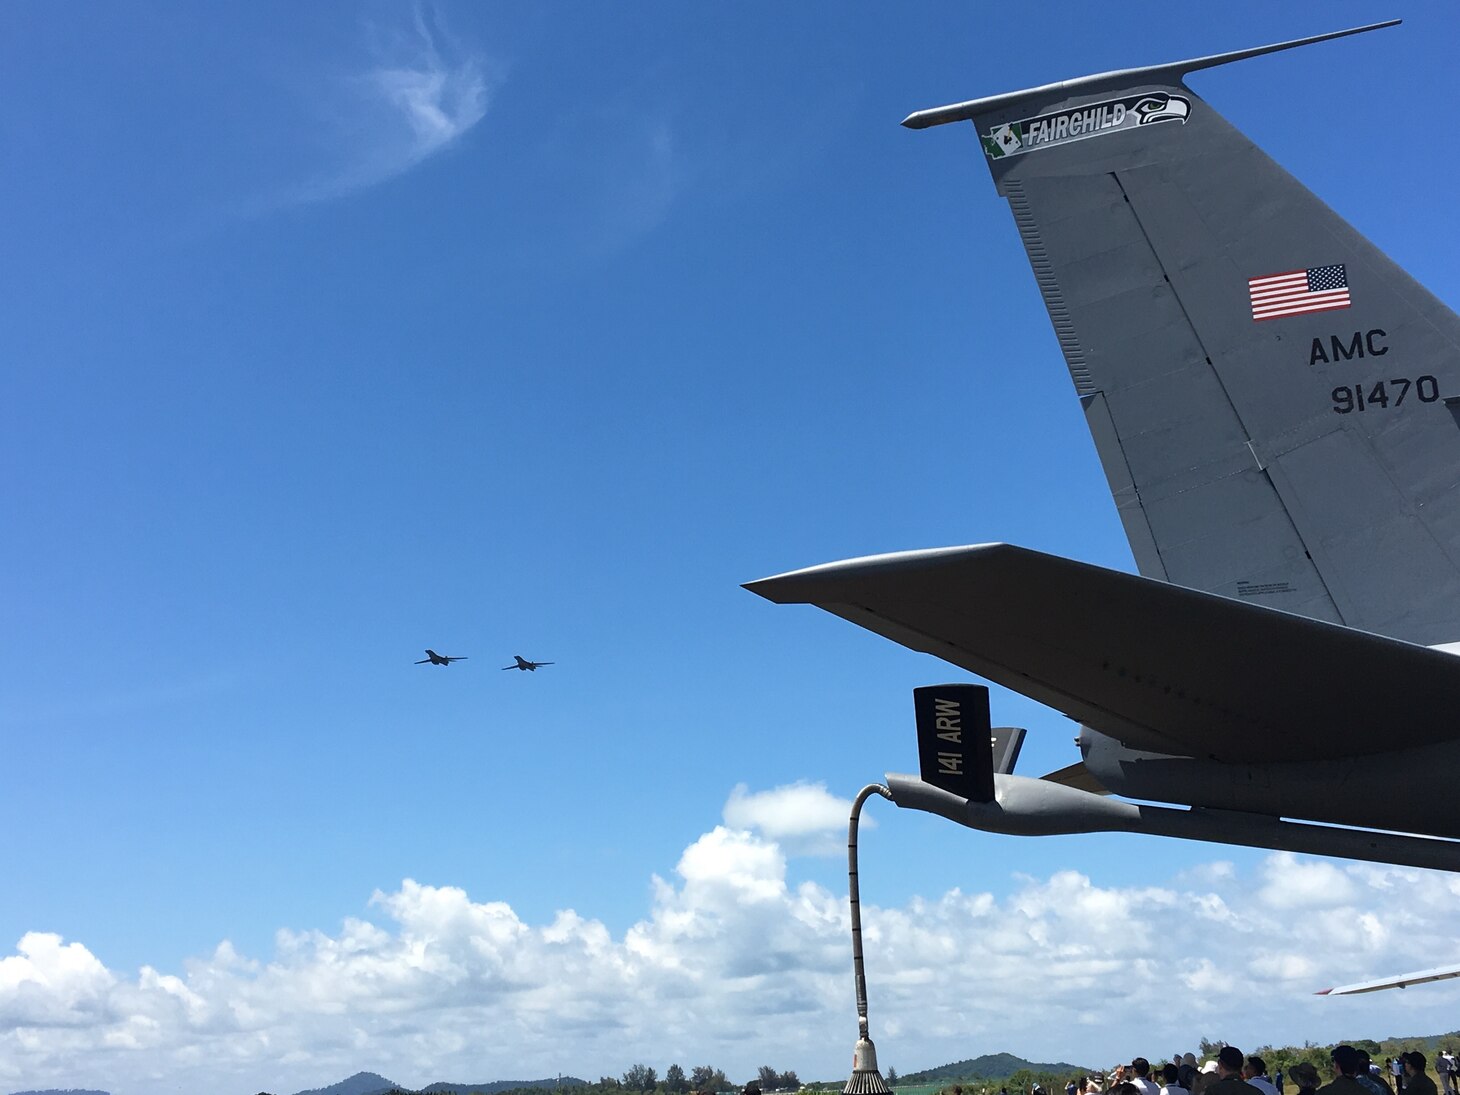 Two U.S. Air Force B-1B Lancer bomber aircraft with the 7th Bomb Wing, 9th Expeditionary Bomb Squadron from Dyess Air Force Base, Texas, currently deployed to Andersen Air Force Base in Guam, conduct a flyover during Langkawi International Maritime and Aerospace Exhibition (LIMA) 2017, Langkawi Island, Malaysia, March 21, 2017. LIMA is the premier aerospace and maritime exhibition in Malaysia. The biennial event helps grow military-to-military relationship between participants. The B-1 is a highly versatile, multi-mission weapon system that can rapidly deliver massive quantities of precision and non-precision weapons against any adversary. The B-1 is a key component to improving both joint service and ally interoperability. The rotation of this aircraft supports U.S. Pacific Command’s Continuous Bomber Presence, and is specifically designed to demonstrate the commitment of the U.S. to the Indo-Asia-Pacific region and regional security. (U.S. Air Force photo by Capt. Jessica Clark)